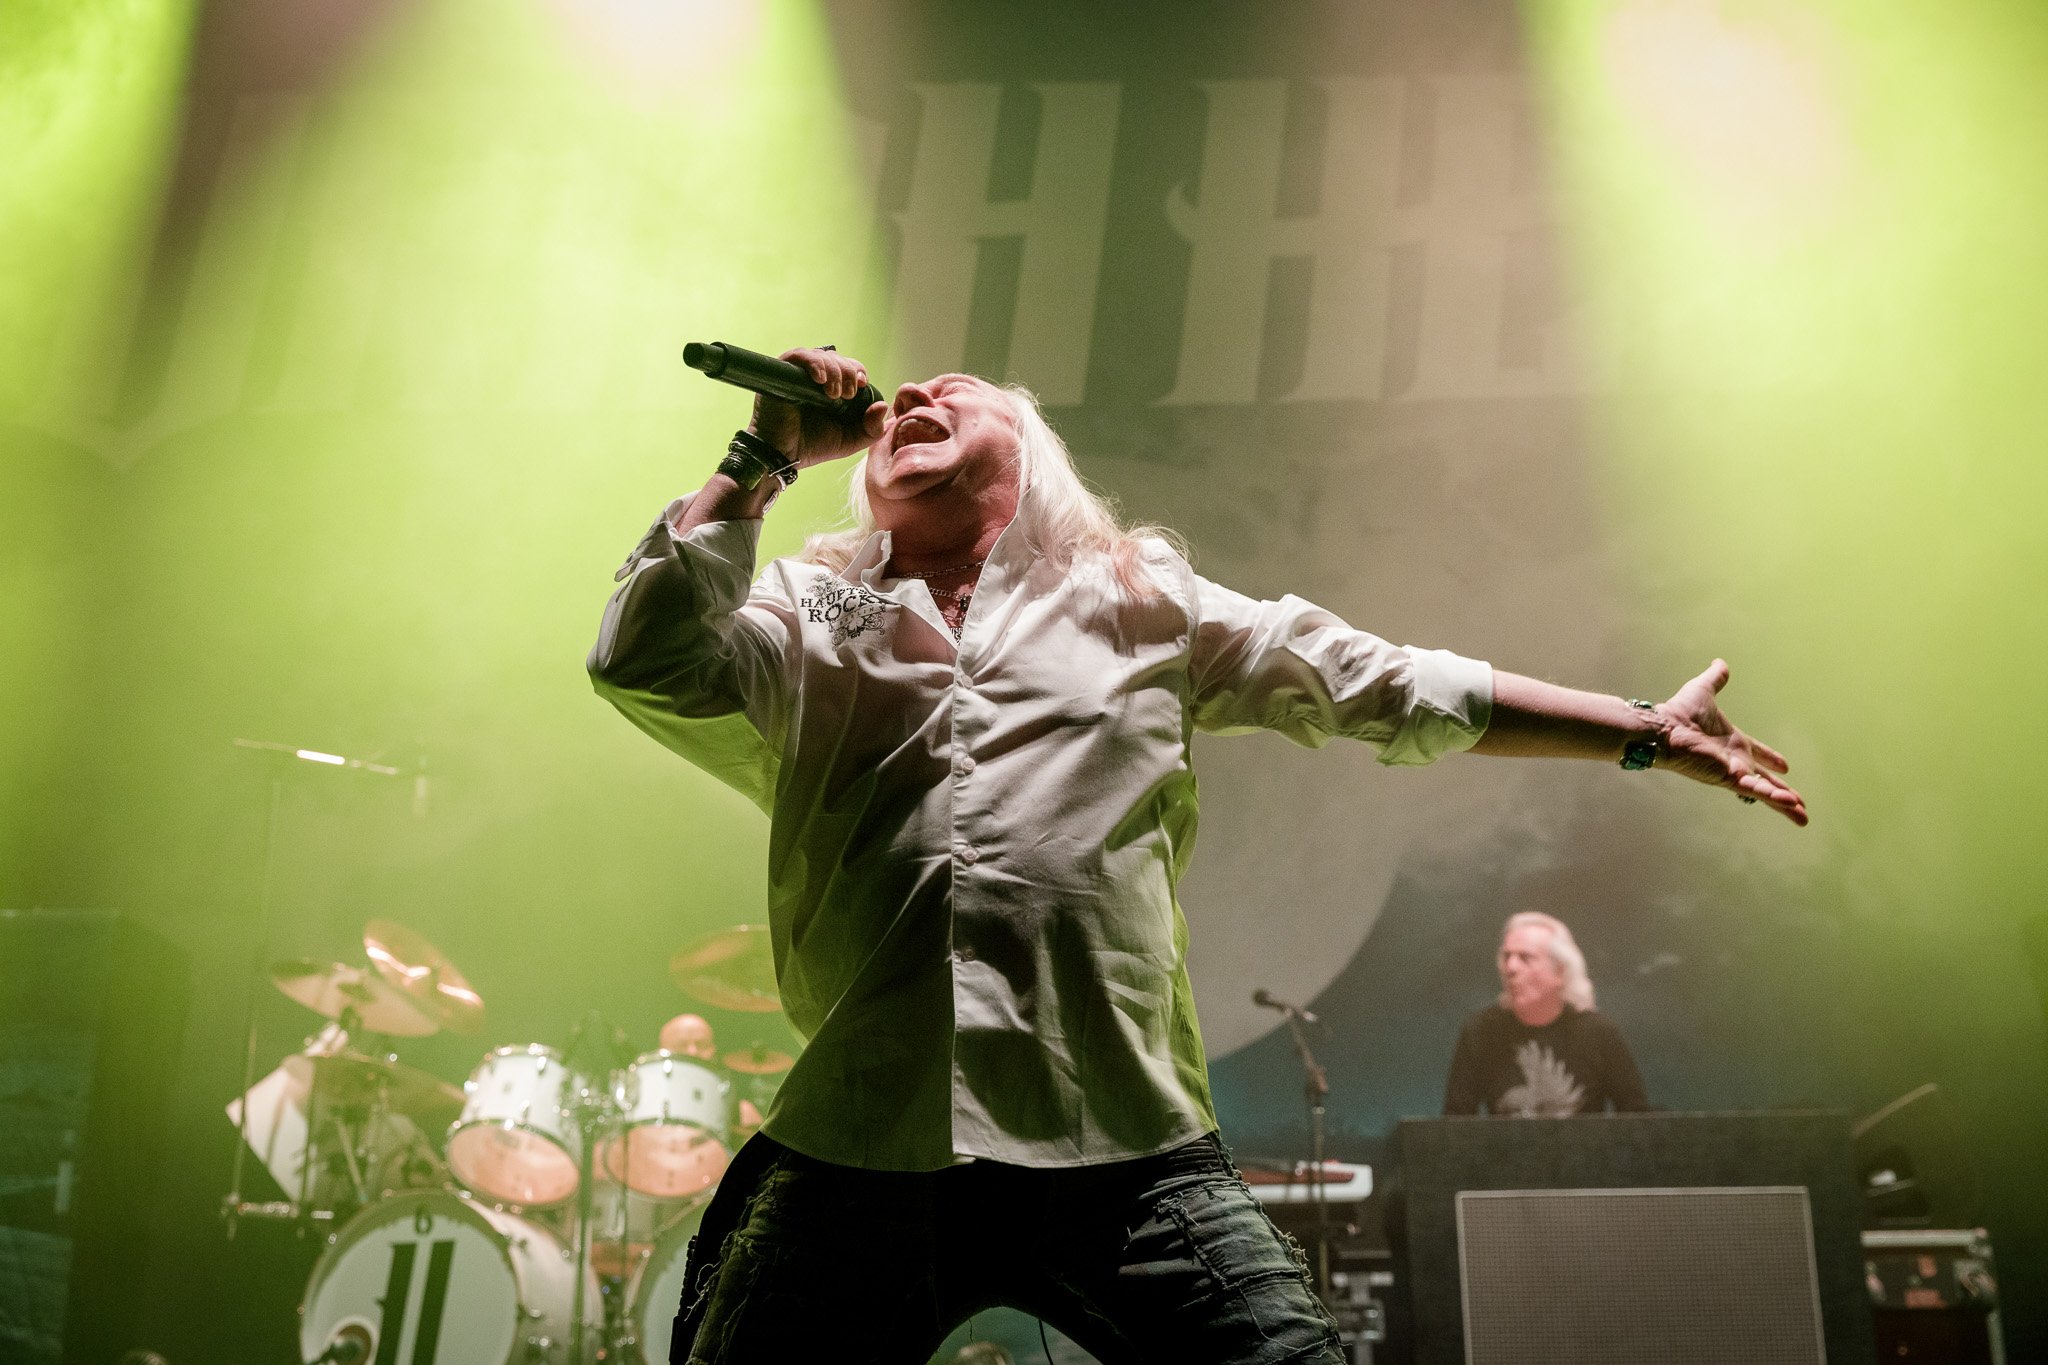 Uriah Heep at the O2 Apollo in Manchester on January 28th 2022 